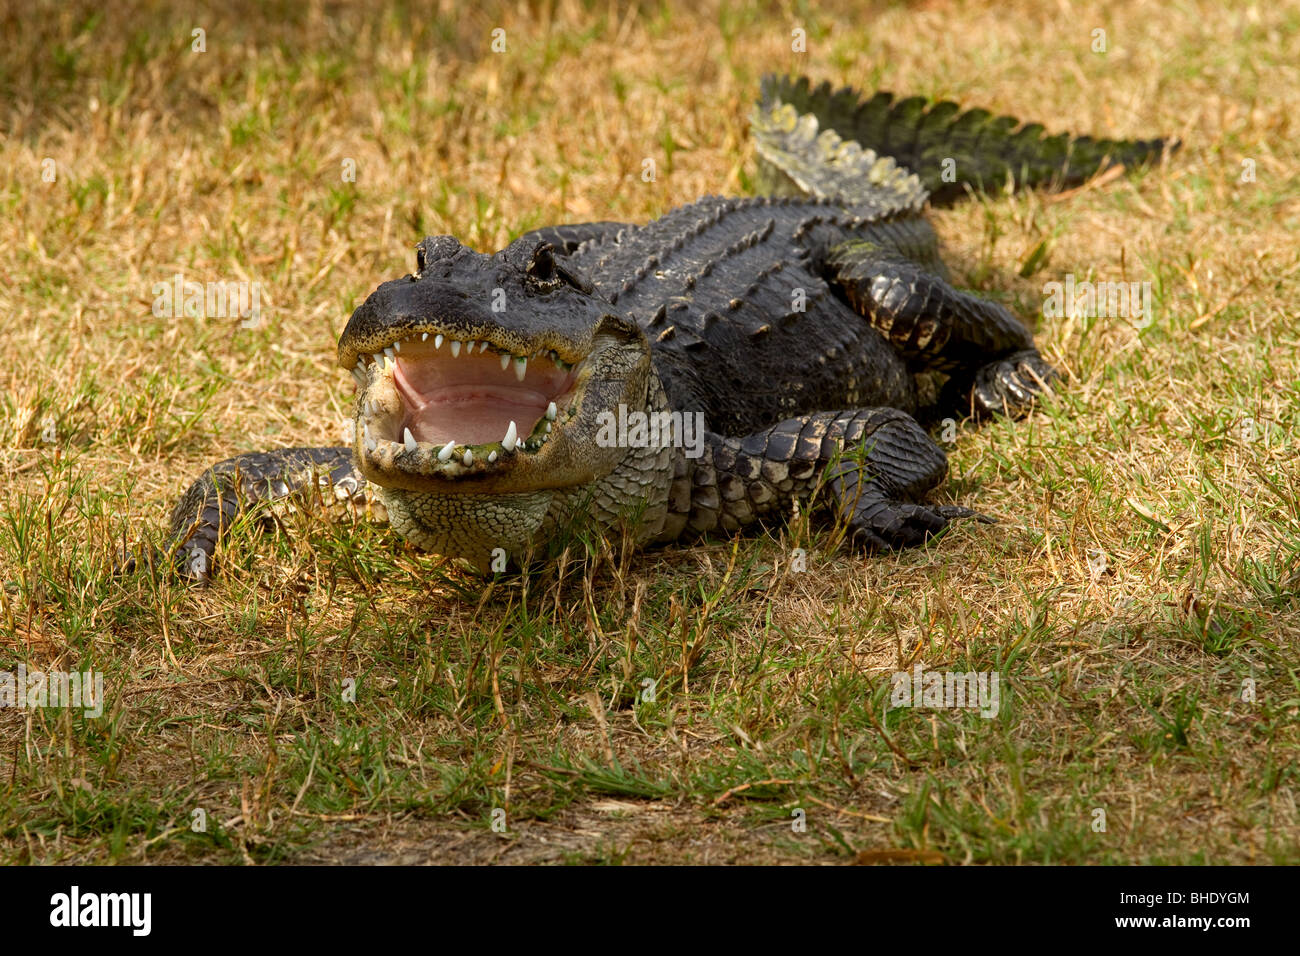 Angry Florida Alligator Alligator mississippiensis reptile Stock Photo